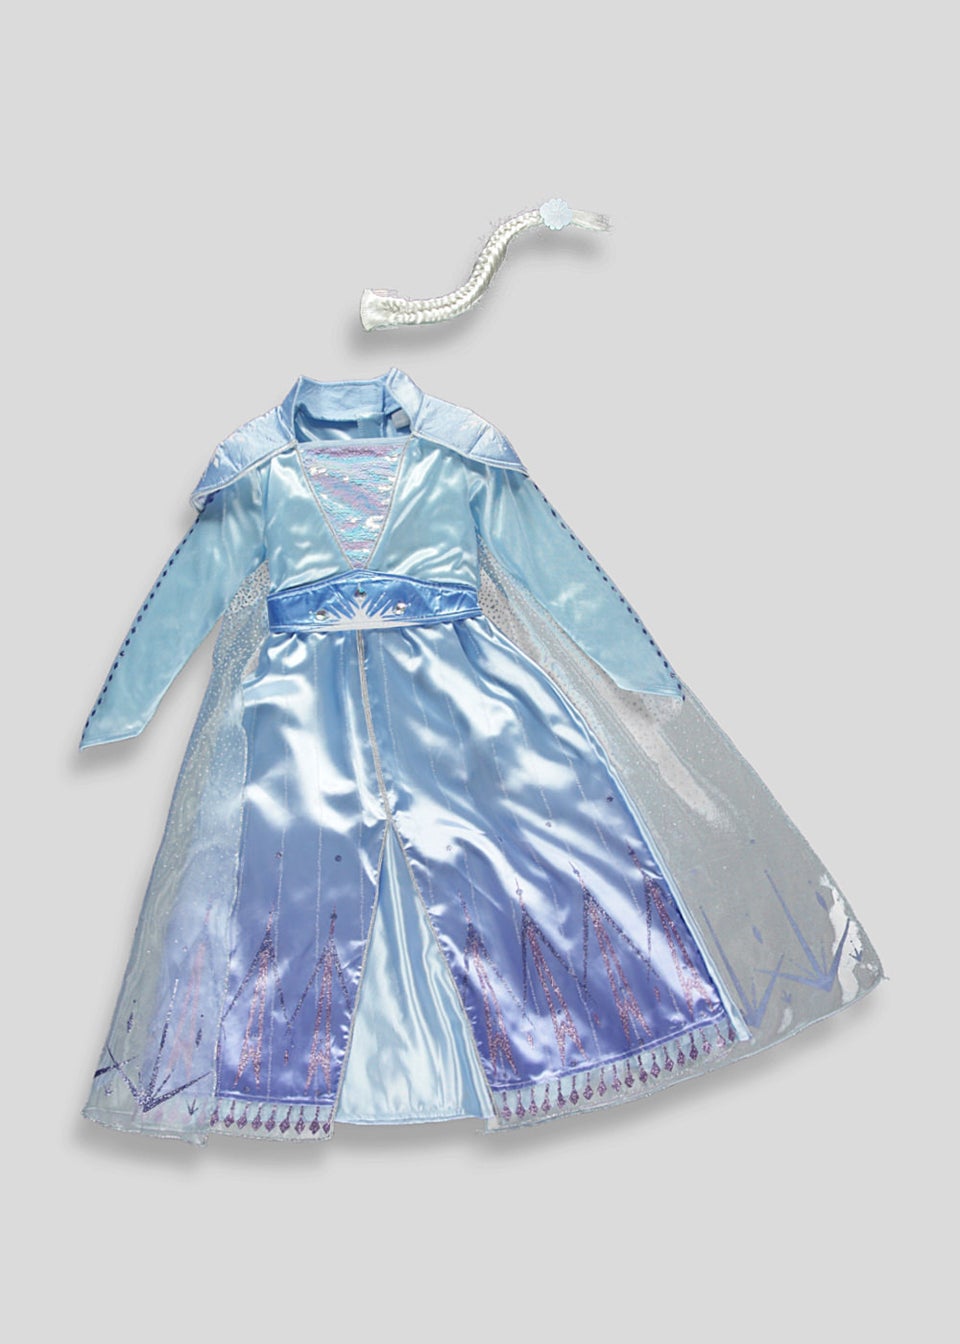 2019 New Release Girls Frozen 2 Elsa White Costume Dress with Cape size  2-10Yrs | eBay